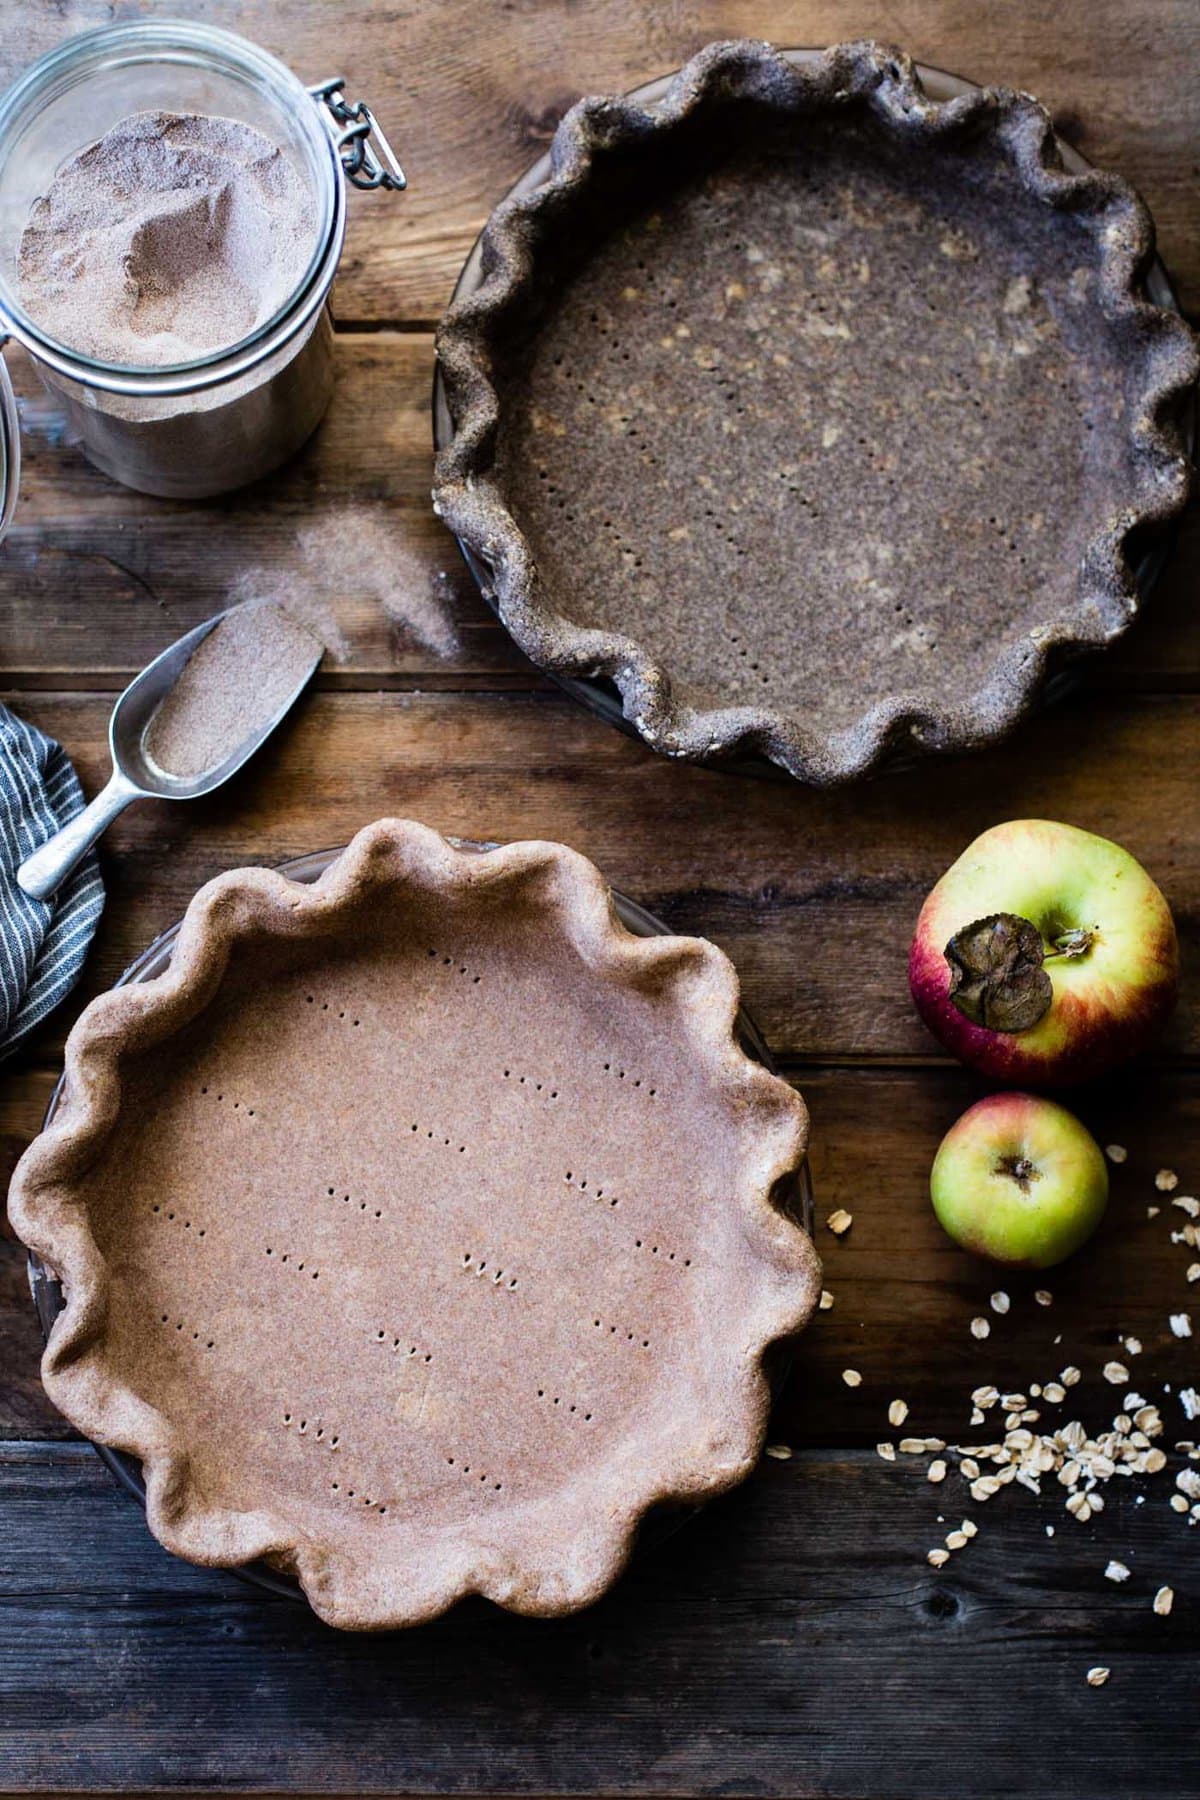 Two pie crusts are on a rusting wood board. One is light brown and one is darker brown. 